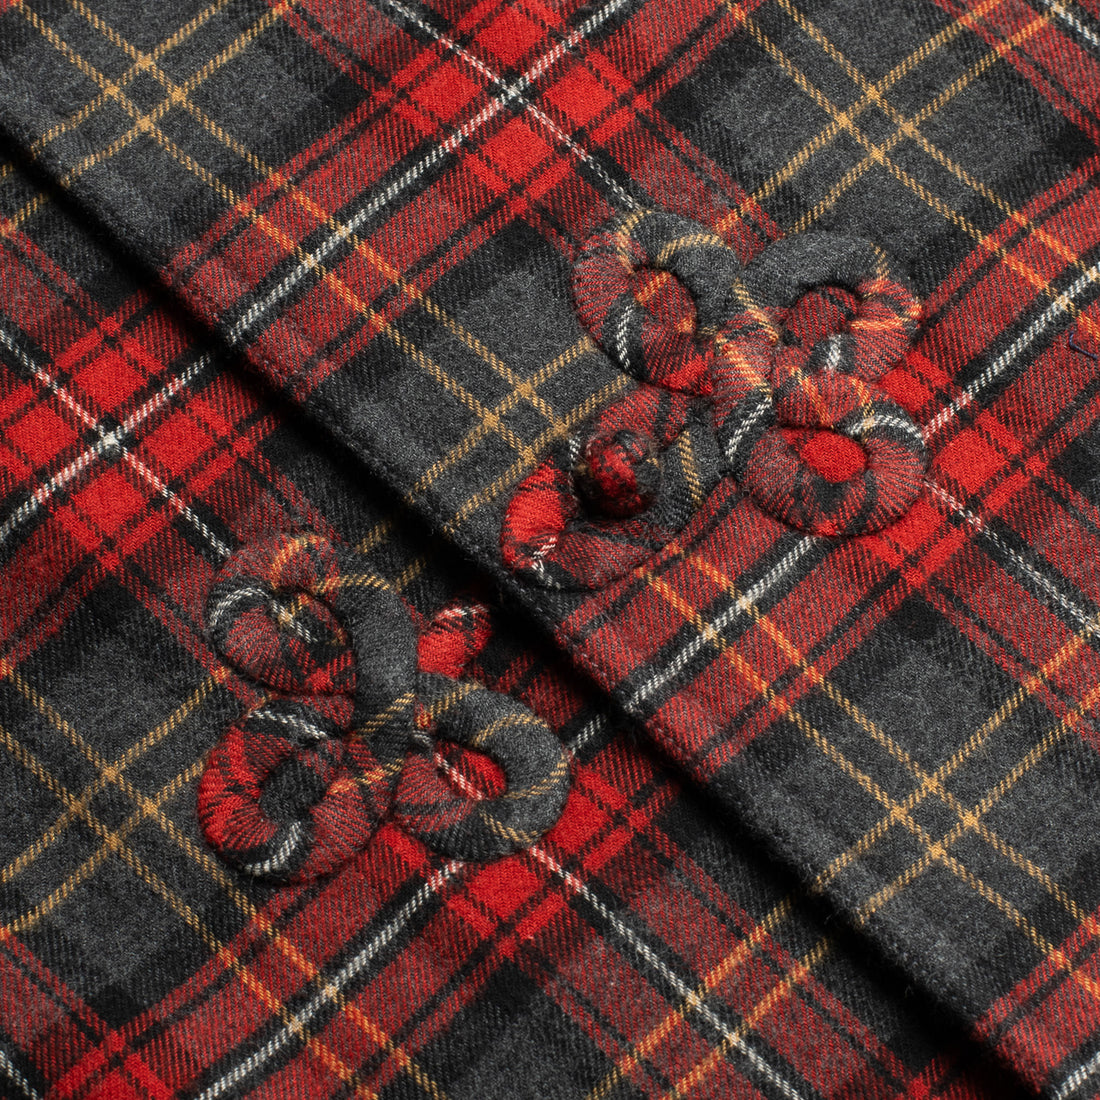 Bryceland's Frogged Button Shirt Red Plaid